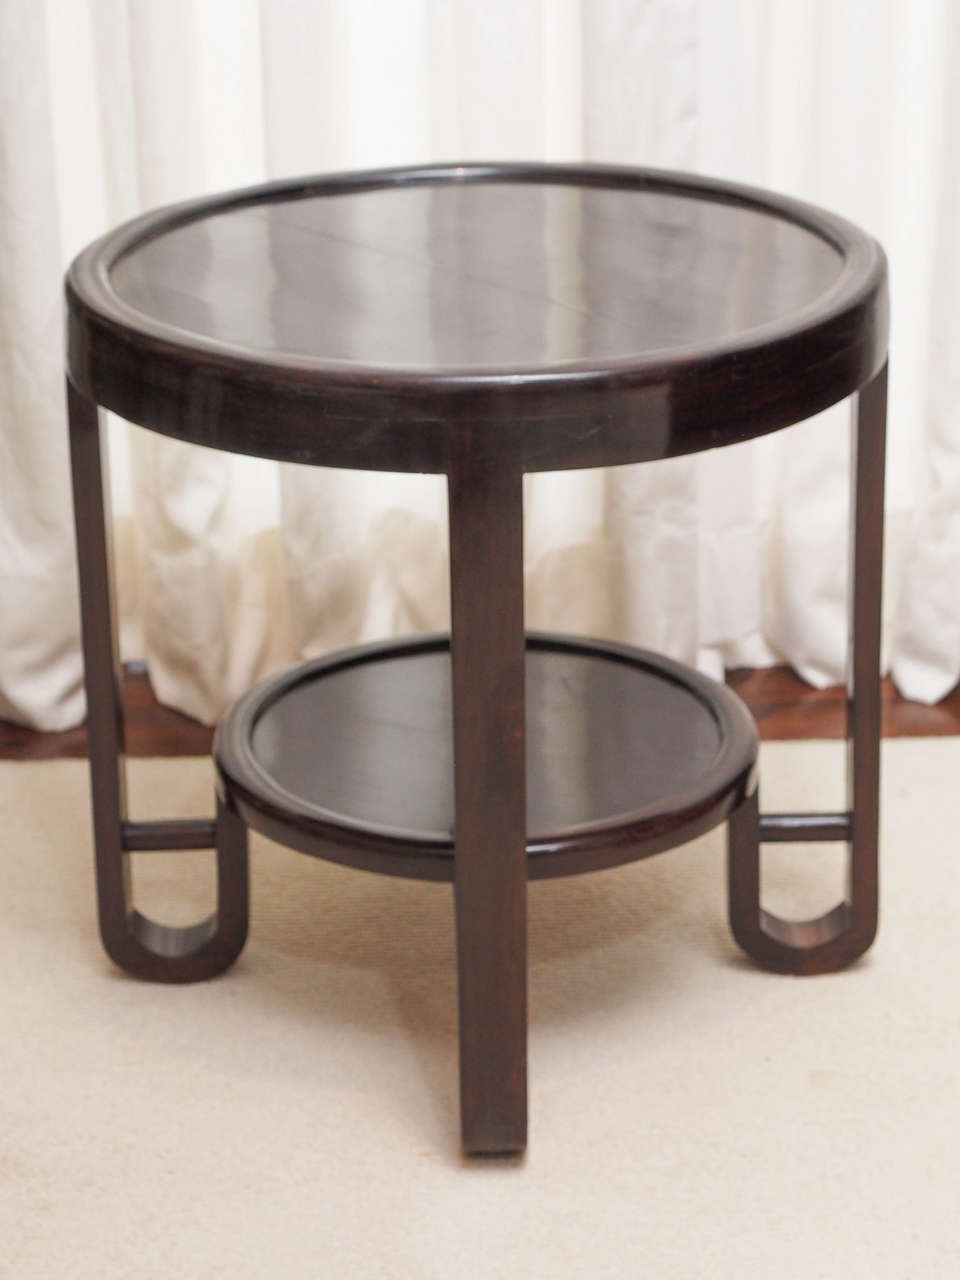 Small two-tier side table; interesting curved shape to the legs